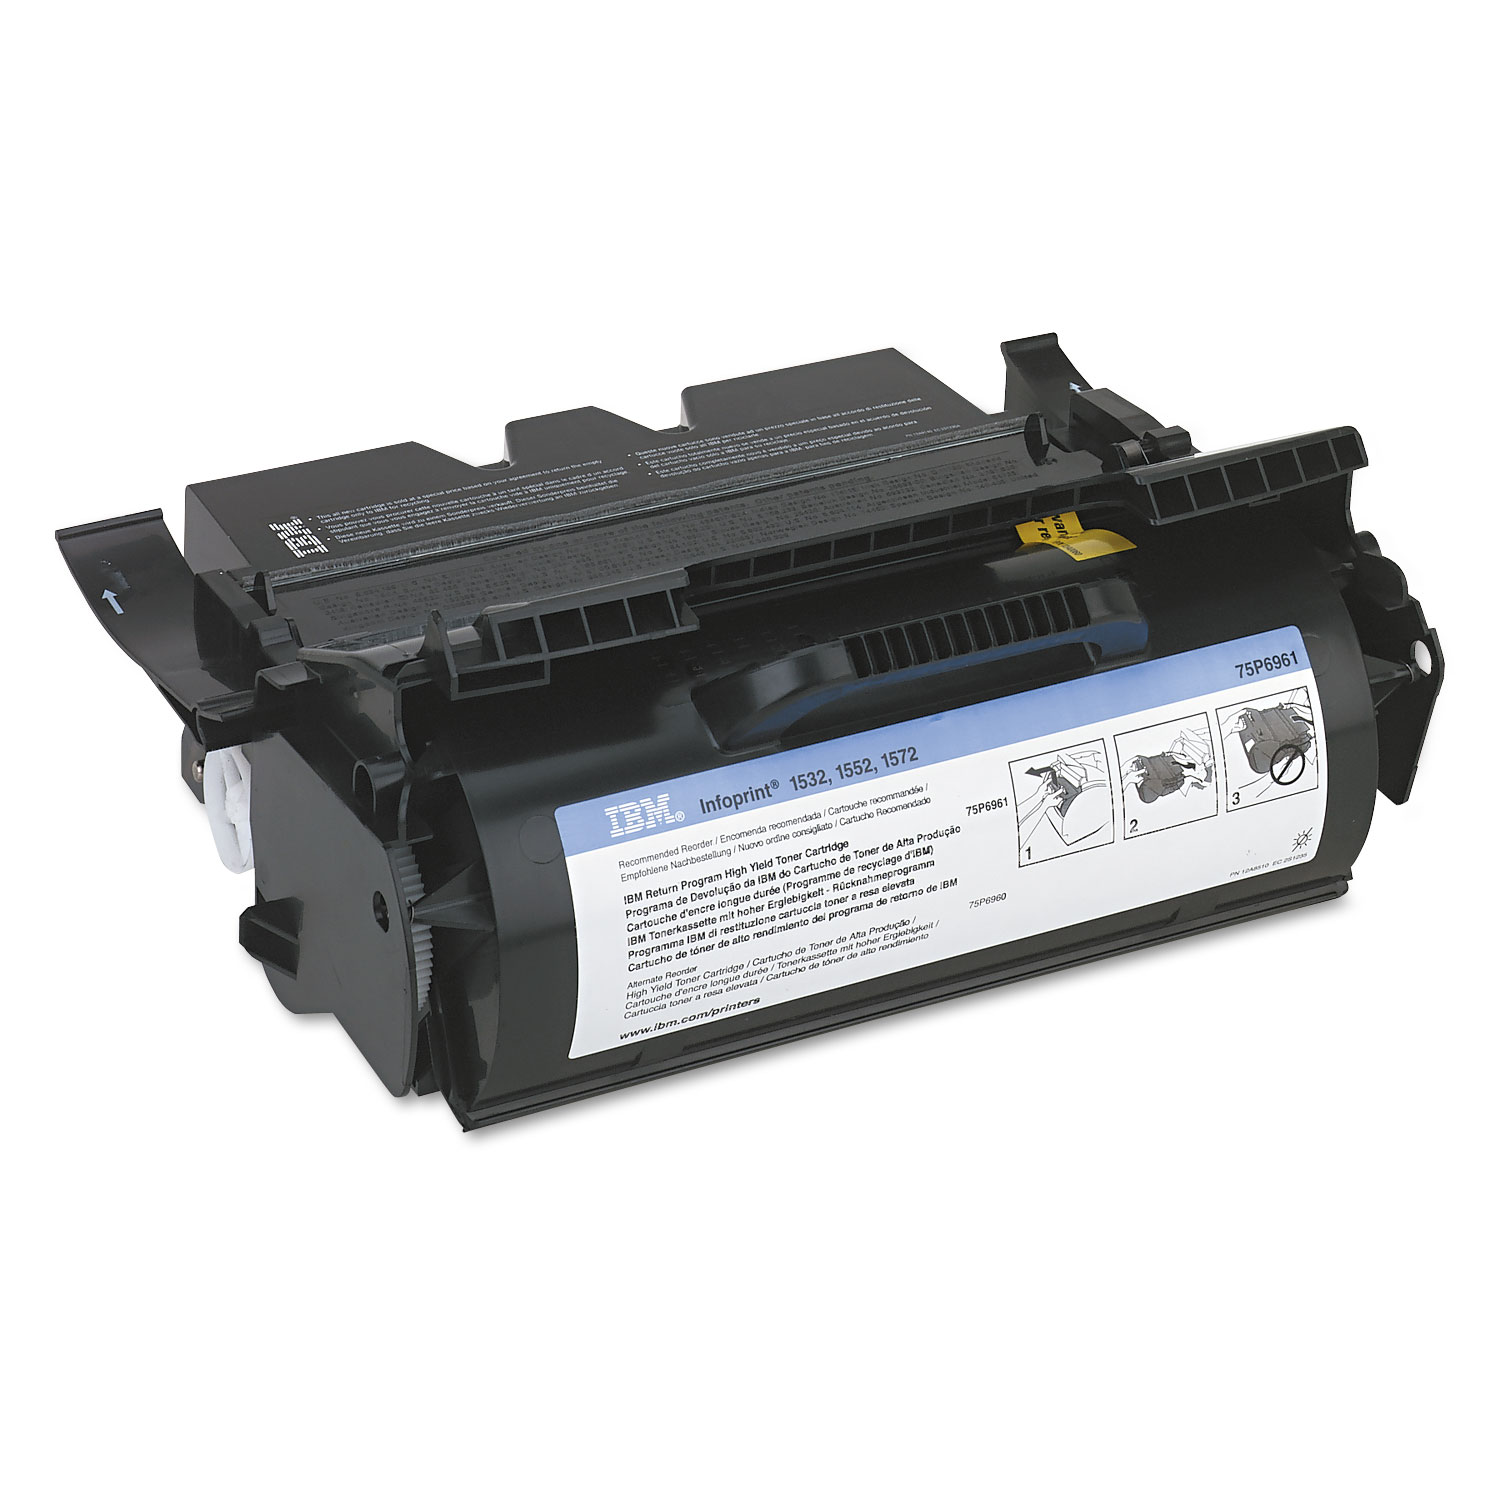  InfoPrint Solutions Company 75P6961 75P6961 High-Yield Toner, 21000 Page-Yield, Black (IFP75P6961) 